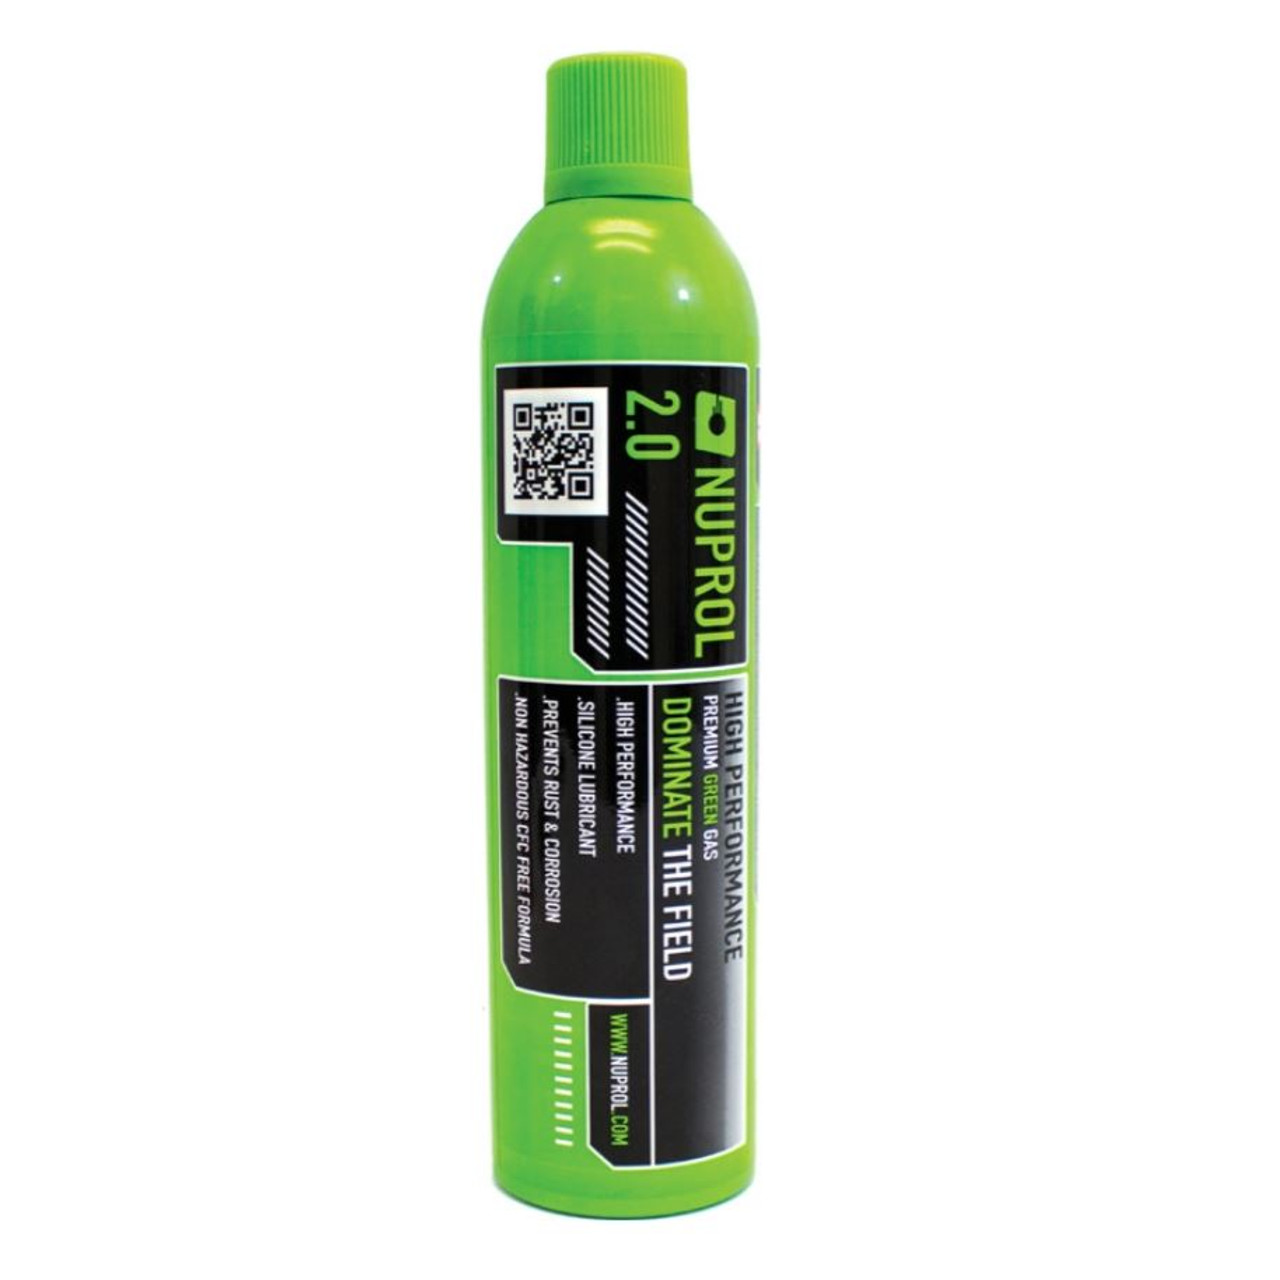 Nuprol 2.0 Green Gas 300g Airsoft Refill